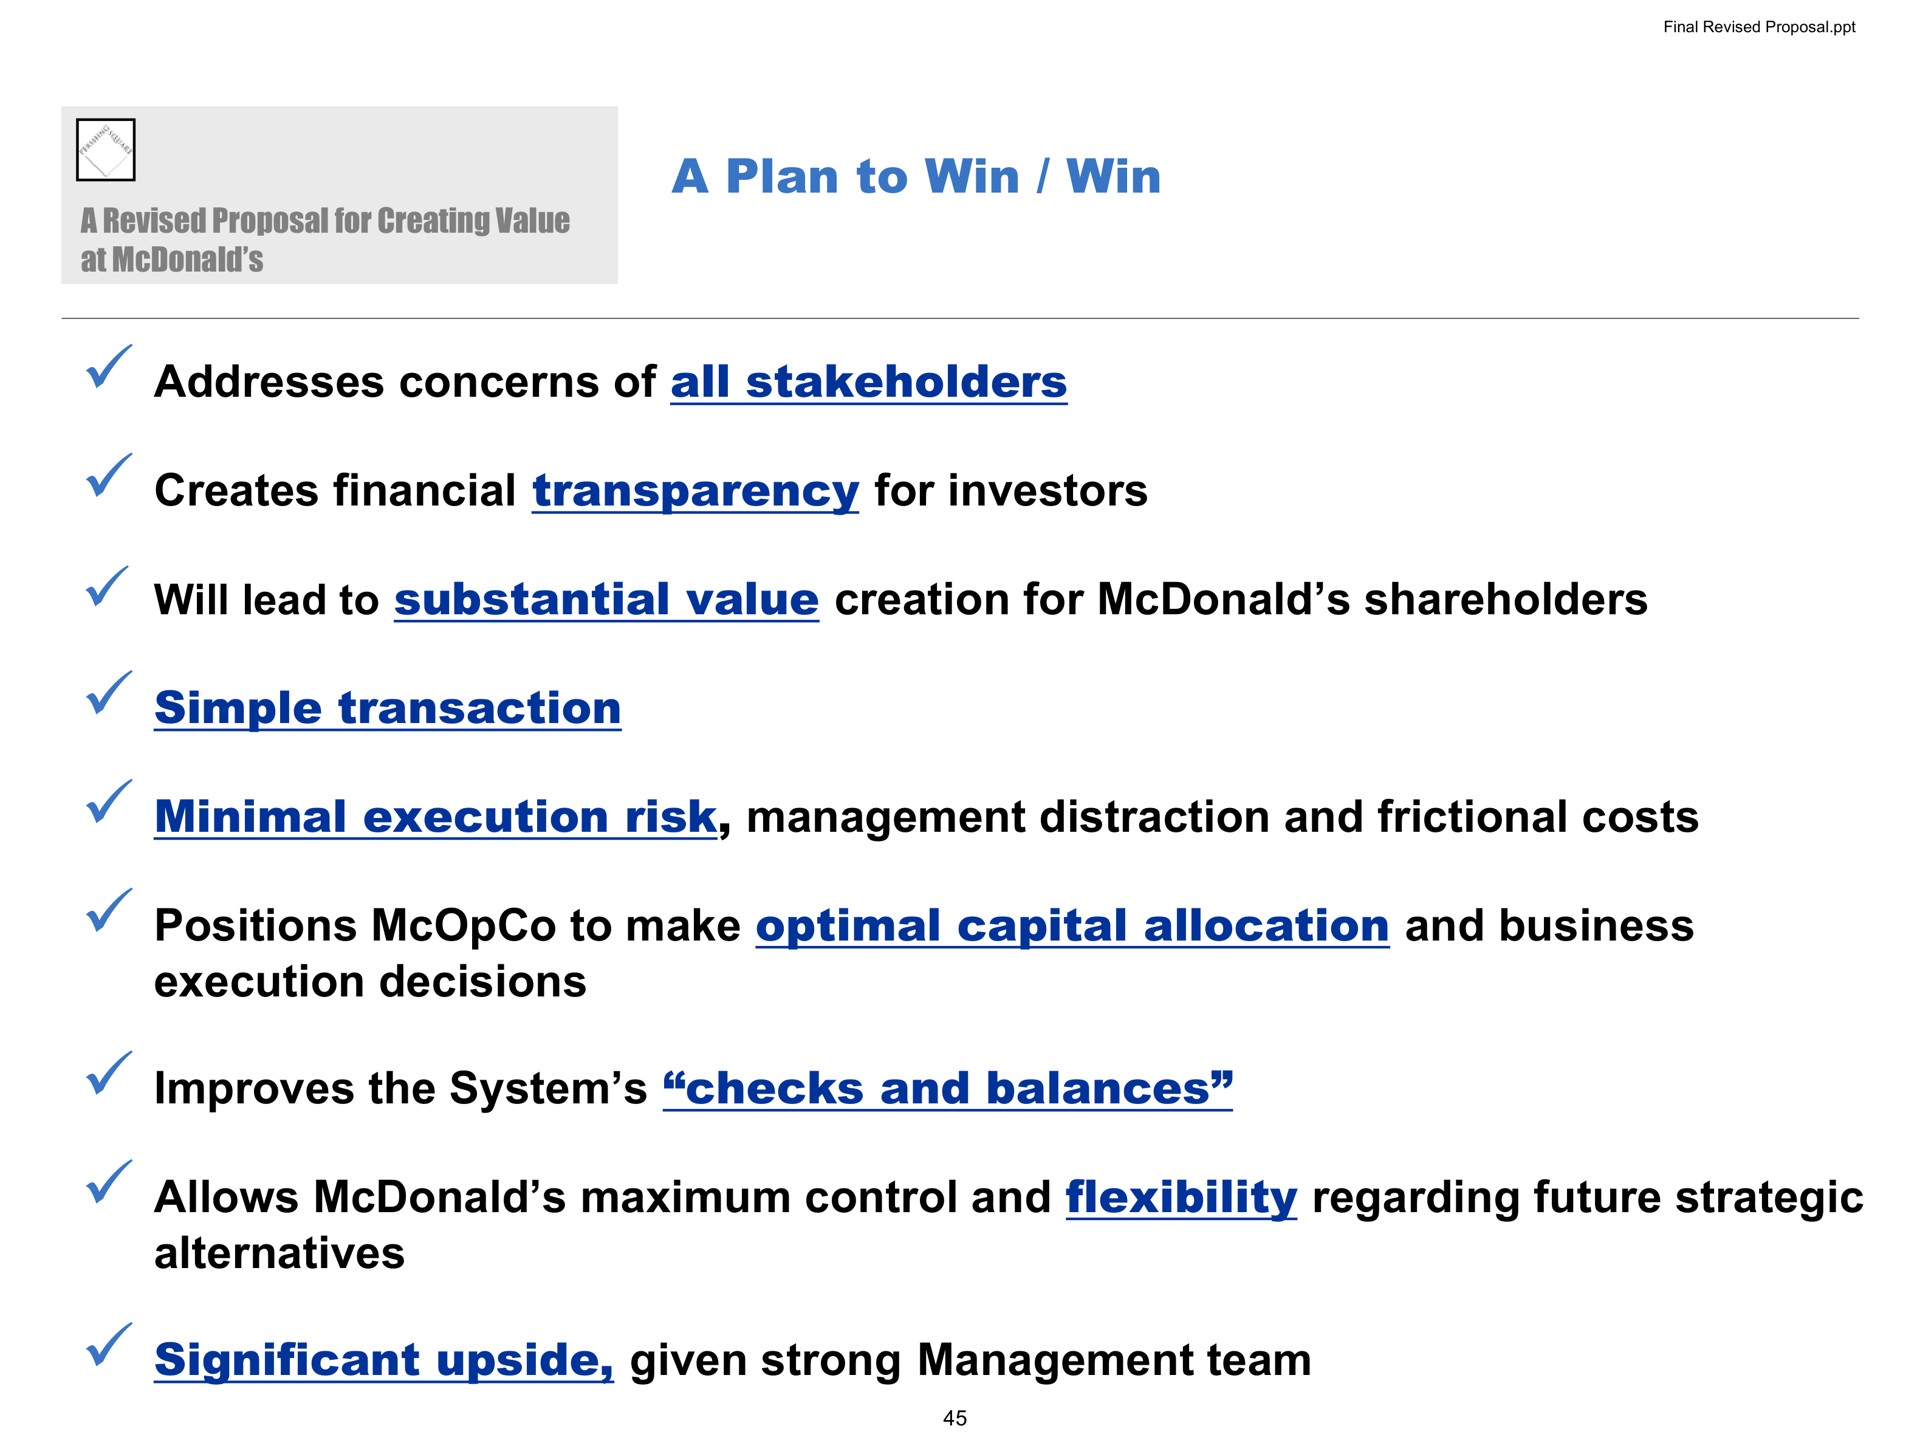 a plan to win win addresses concerns of all stakeholders creates financial transparency for investors will lead to substantial value creation for shareholders simple transaction minimal execution risk management distraction and frictional costs positions to make optimal capital allocation and business execution decisions improves the system checks and balances allows maximum control and flexibility regarding future strategic alternatives significant upside given strong management team | Pershing Square